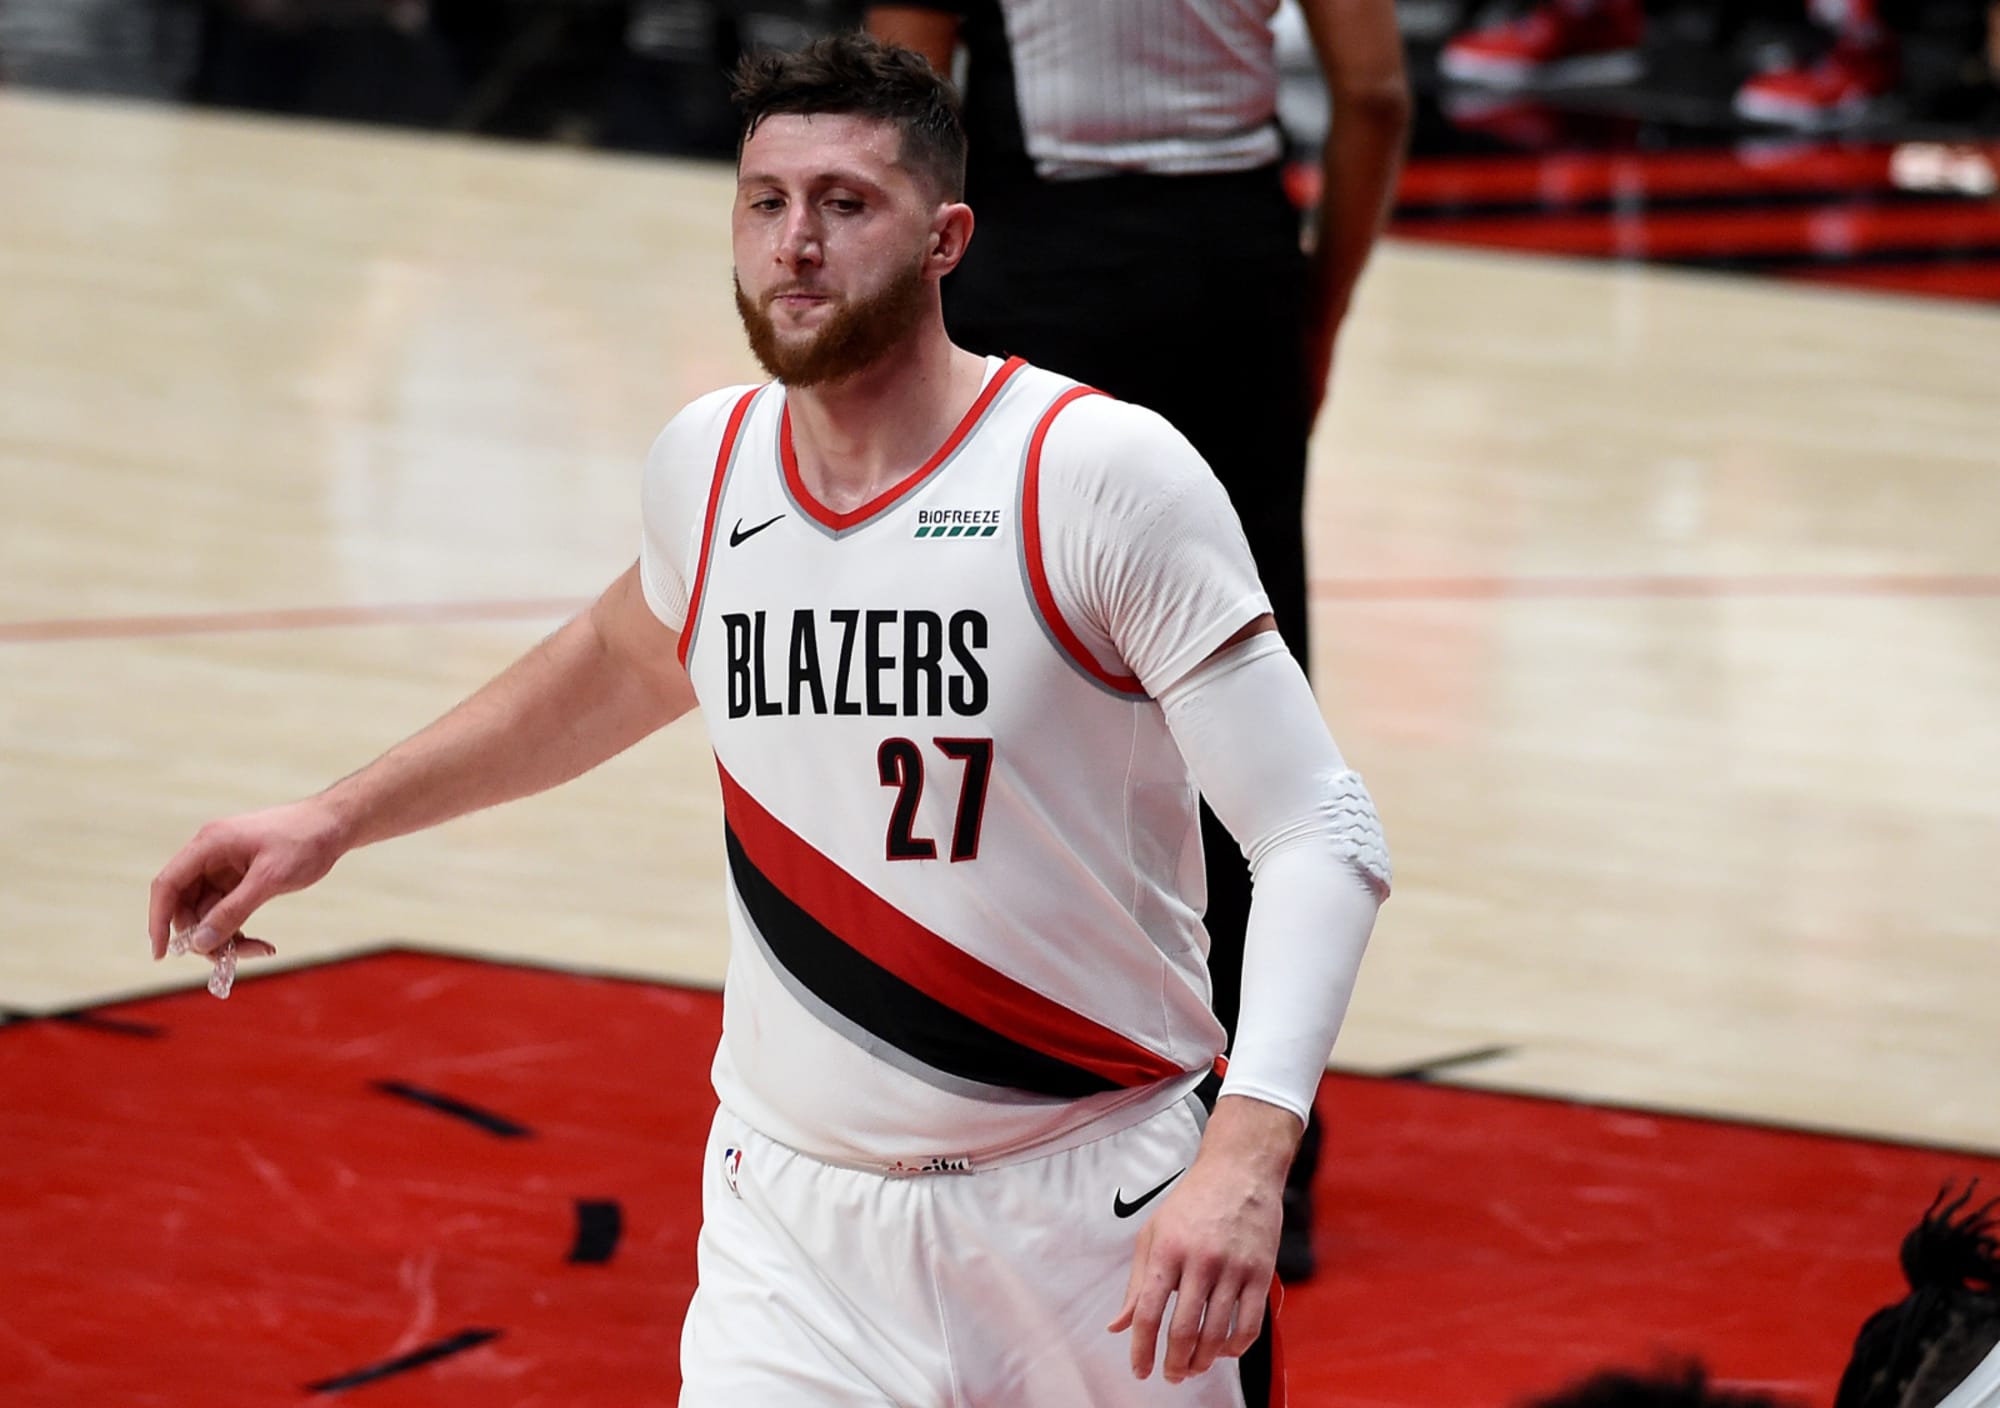 Jusuf Nurkic: Why Nuggets Fans Shouldn't Regret Trading Him.